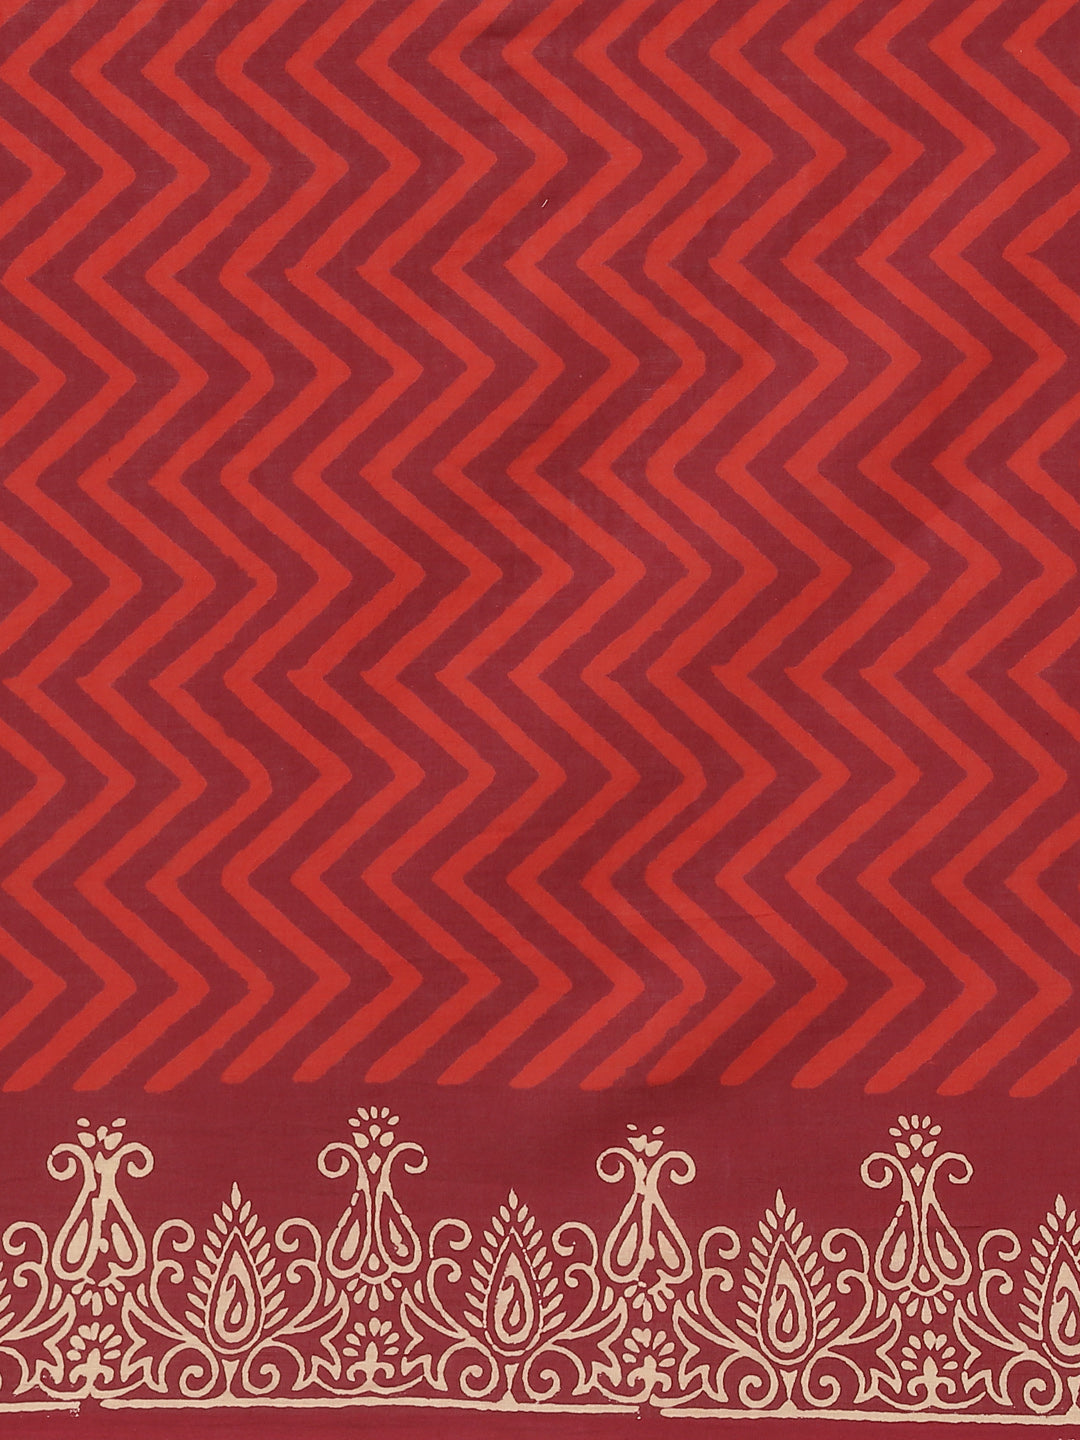 Red and Maroon, Kalakari India Pure Cotton Handblock Printed Saree and Blouse RCBGSA0022-Saree-Kalakari India-RCBGSA0022-Cotton, Geographical Indication, Hand Block, Hand Crafted, Heritage Prints, Natural Dyes, Red, Sarees, Sustainable Fabrics, Woven, Yellow-[Linen,Ethnic,wear,Fashionista,Handloom,Handicraft,Indigo,blockprint,block,print,Cotton,Chanderi,Blue, latest,classy,party,bollywood,trendy,summer,style,traditional,formal,elegant,unique,style,hand,block,print, dabu,booti,gift,present,glamor